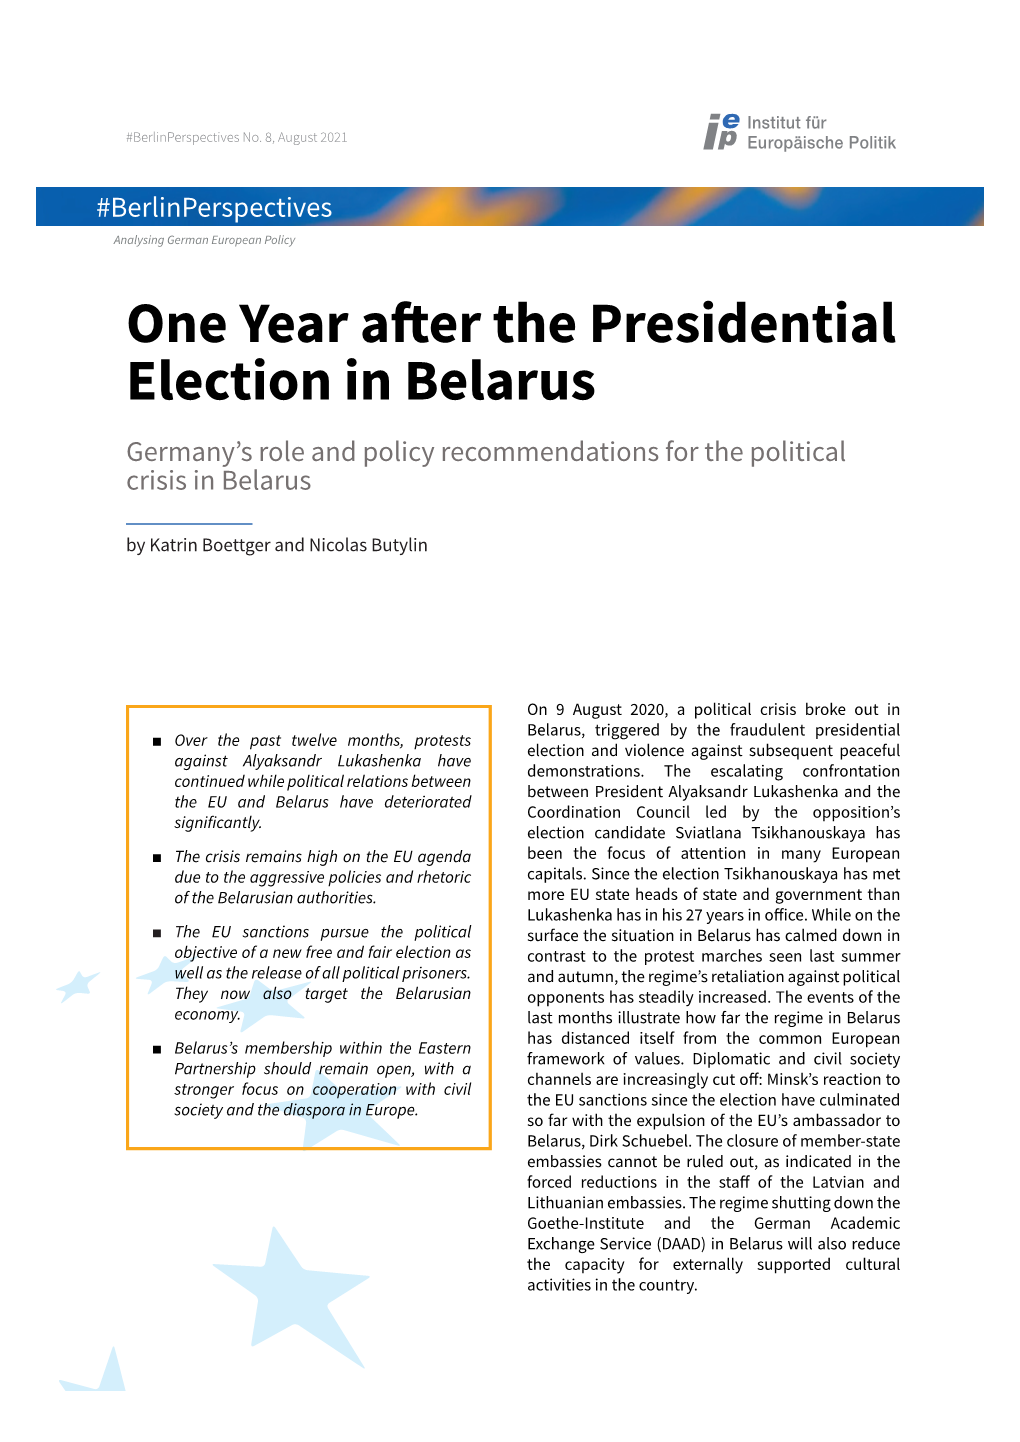 One Year After the Presidential Election in Belarus Germany’S Role and Policy Recommendations for the Political Crisis in Belarus